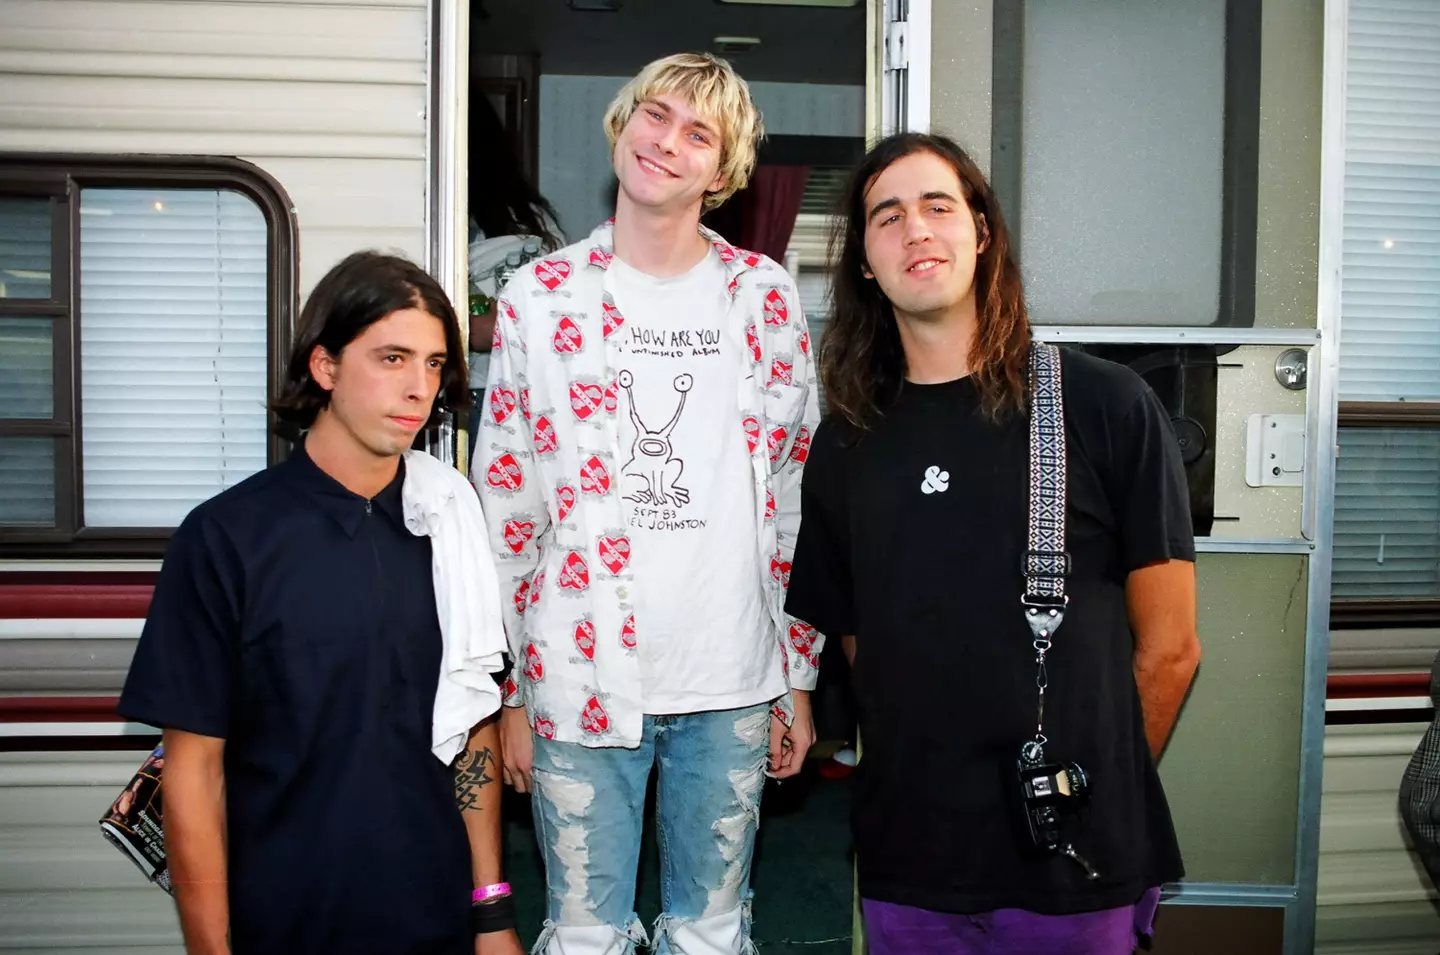 A lawyer for Nirvana called the appeal decision a 'procedural setback'.